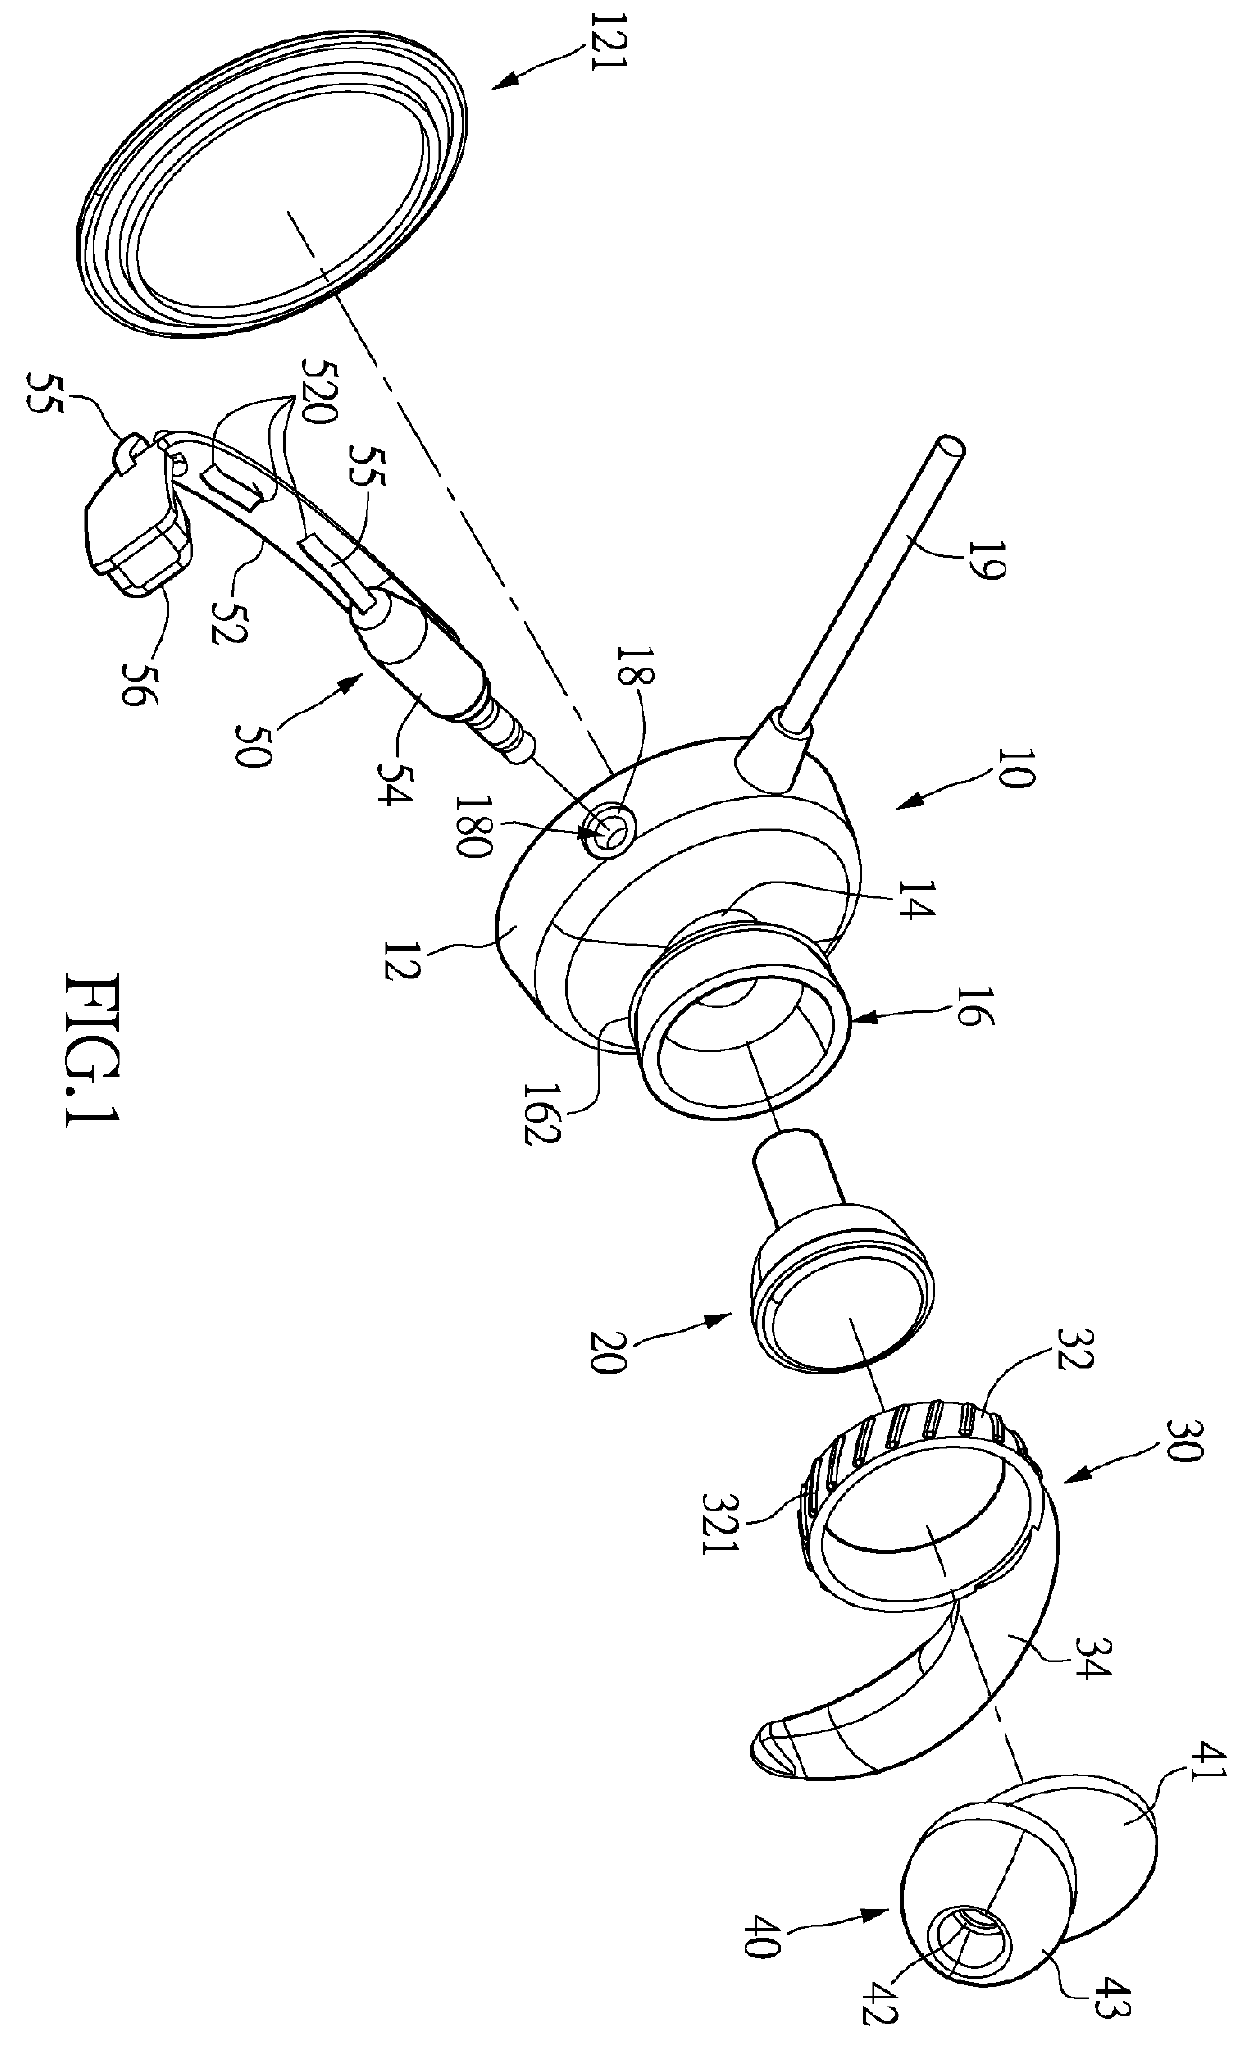 In-ear-canal headset assembly